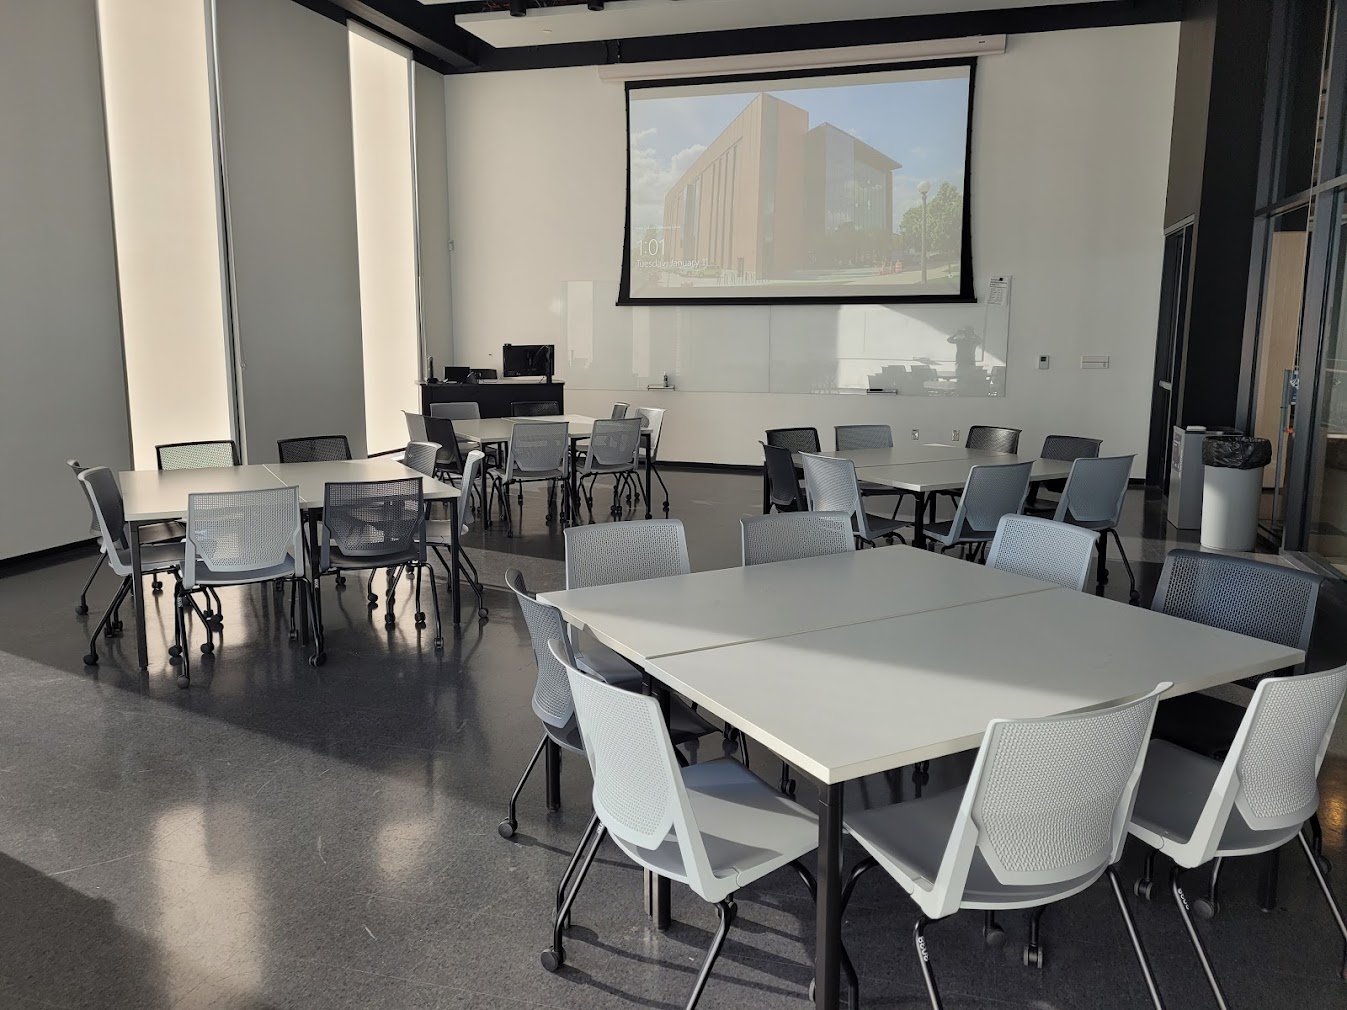 This is a view of the room with student desks, projection screen, a front lecture table, windows, and a glass board.